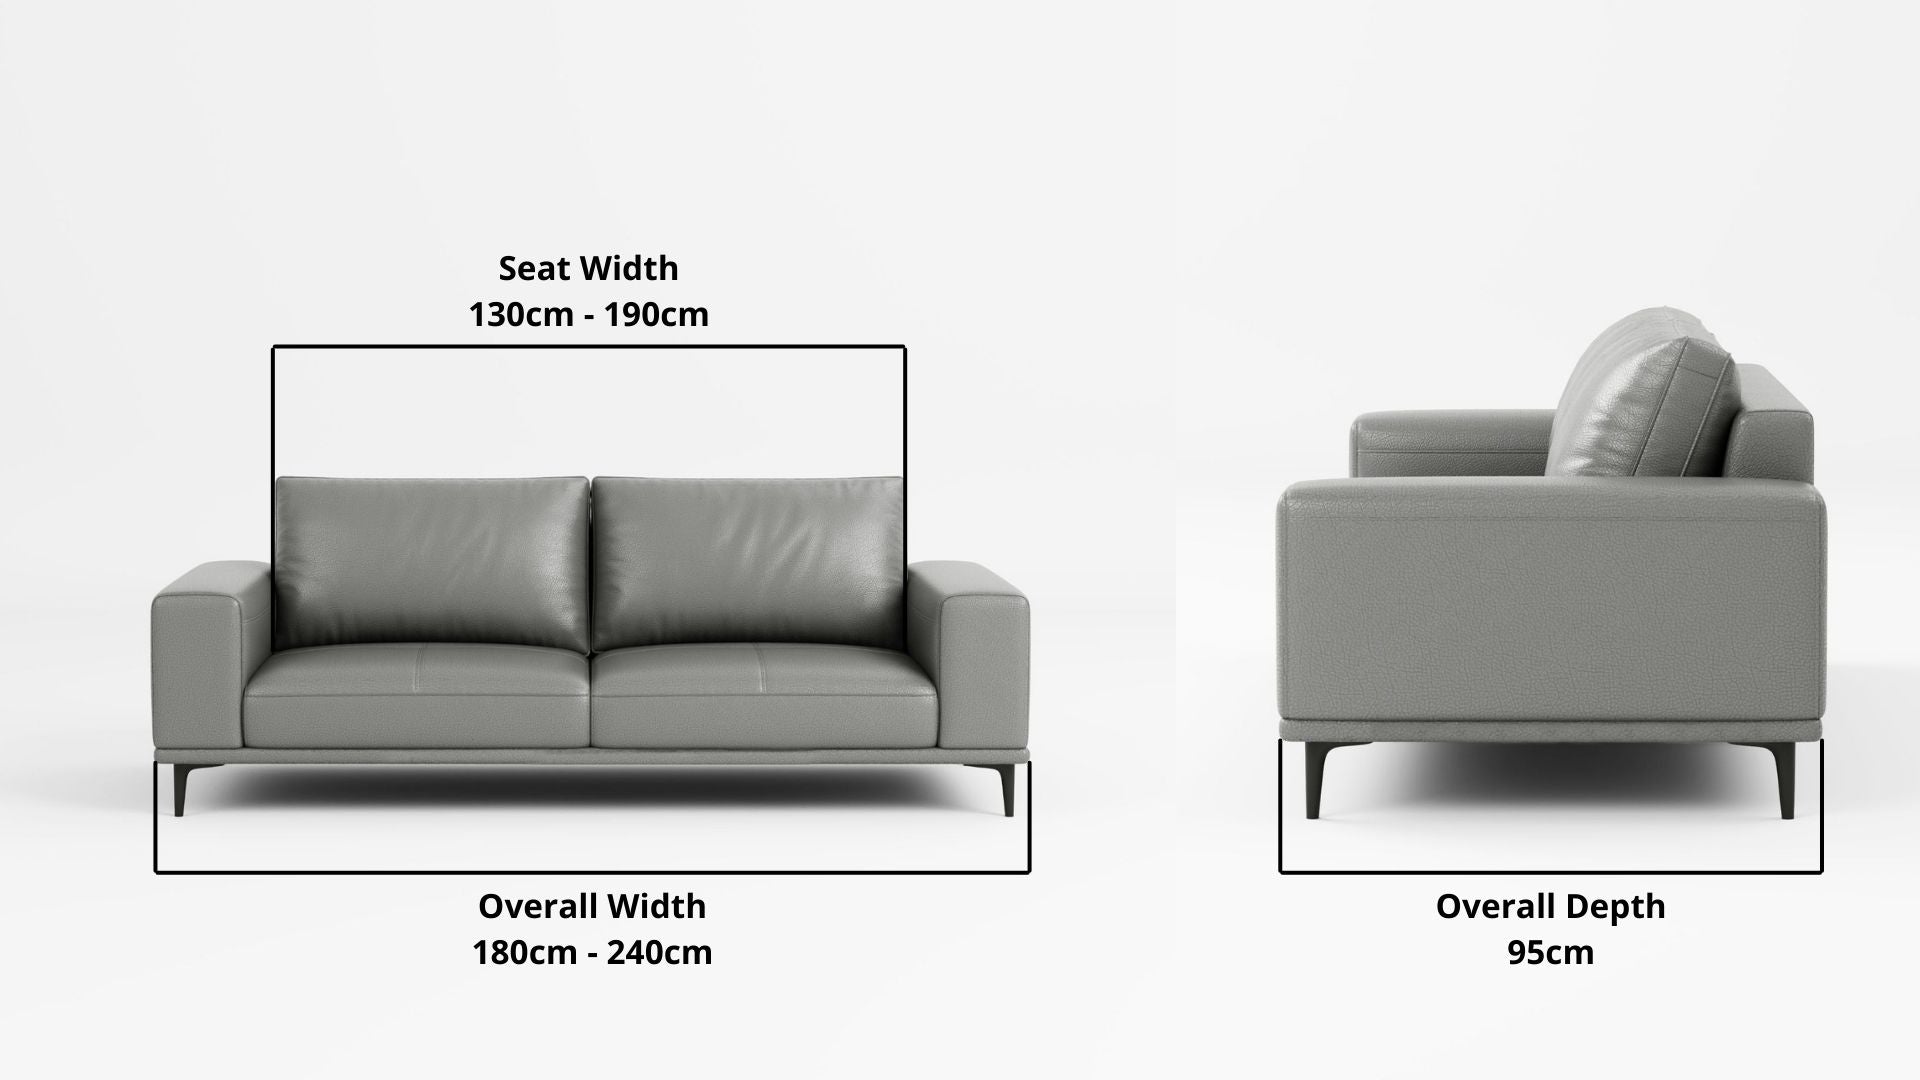 Details the key dimensions in terms of overall width, overall depth and seat width for Calm Full Leather Sofa